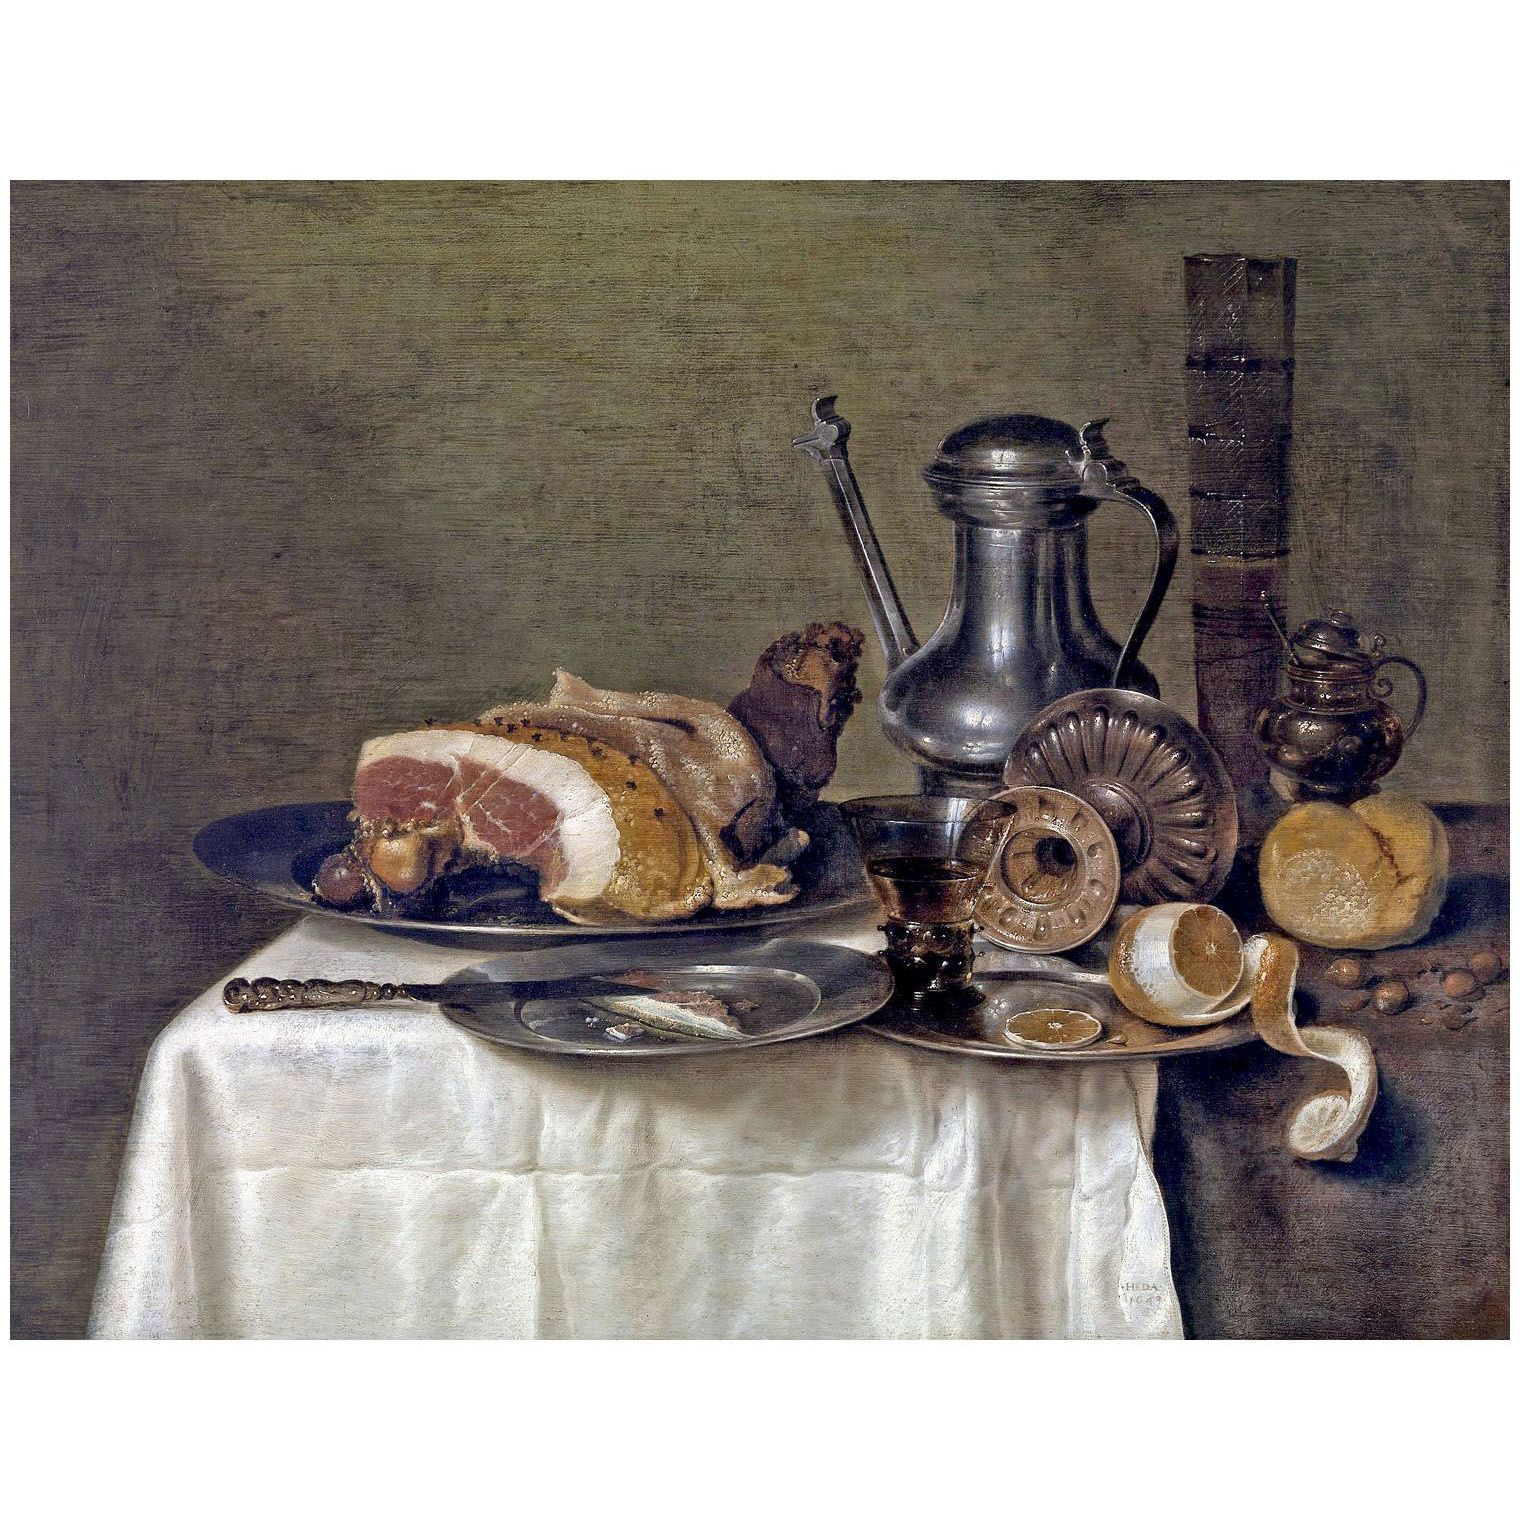 Willem Claesz Heda. Still-Life with Ham and Bread. 1649. MSK Ghent